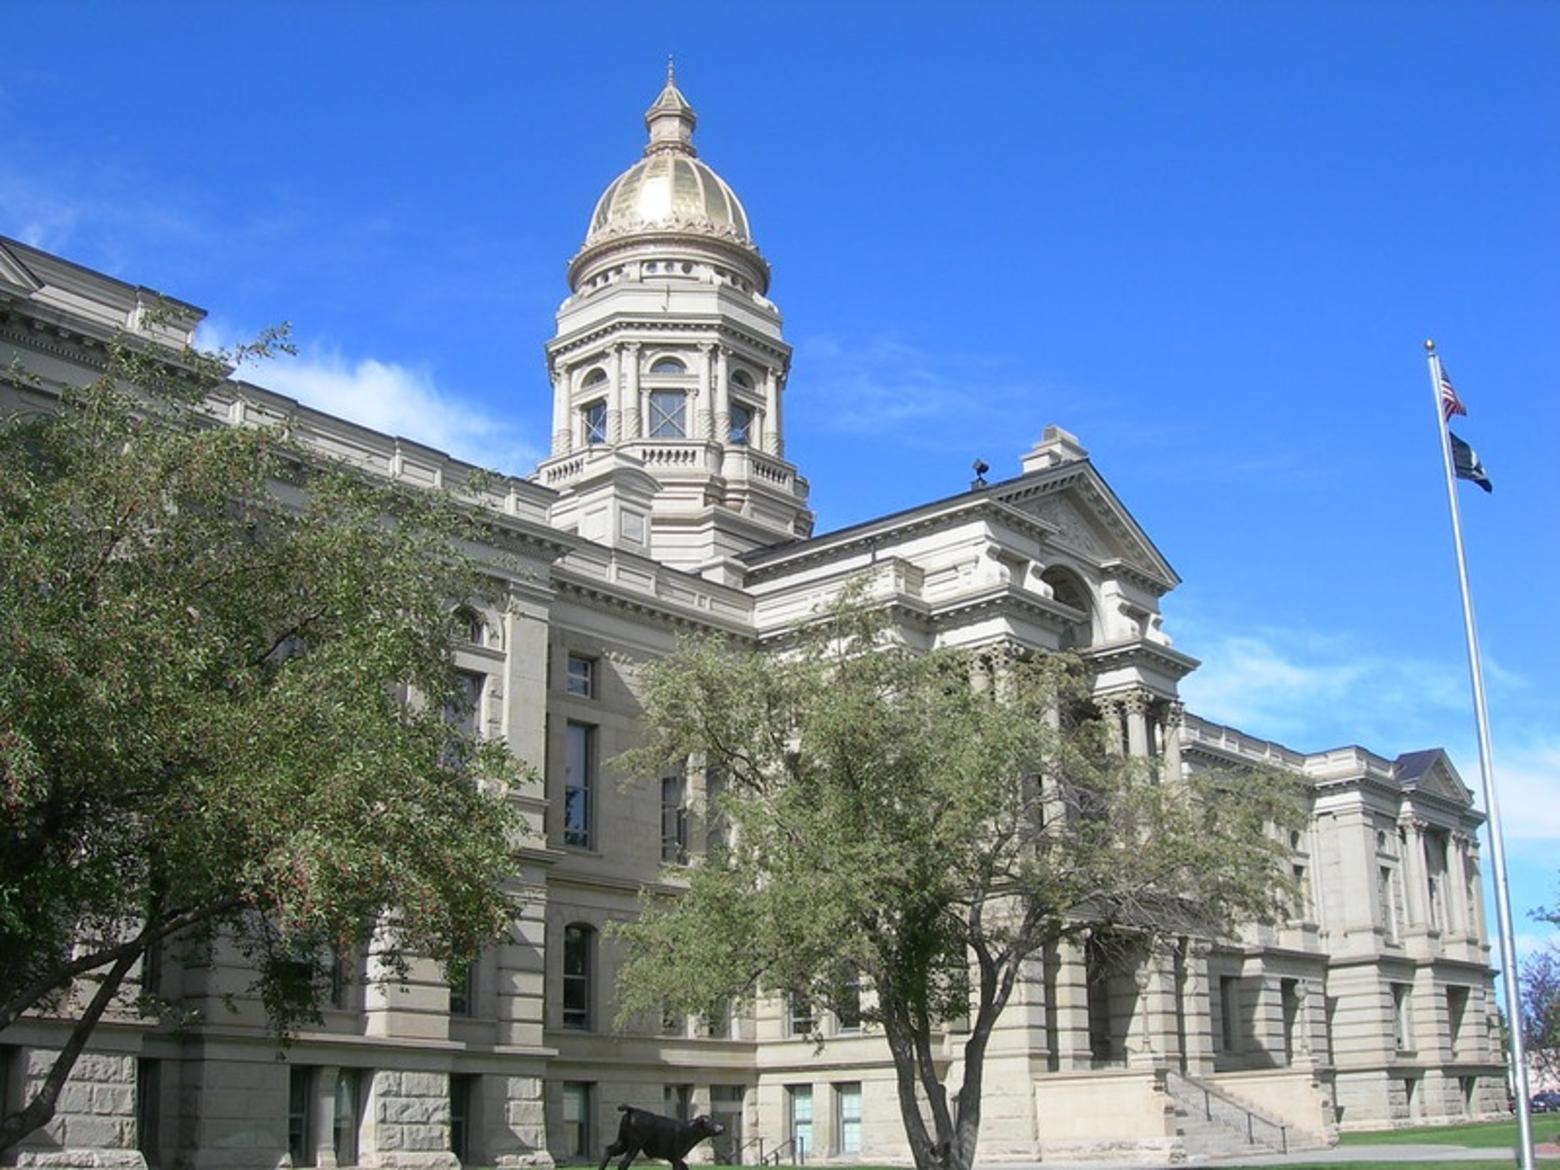 The Wyoming State Capitol building in Cheyenne. Photo by Jimmy Emerson/CC photo